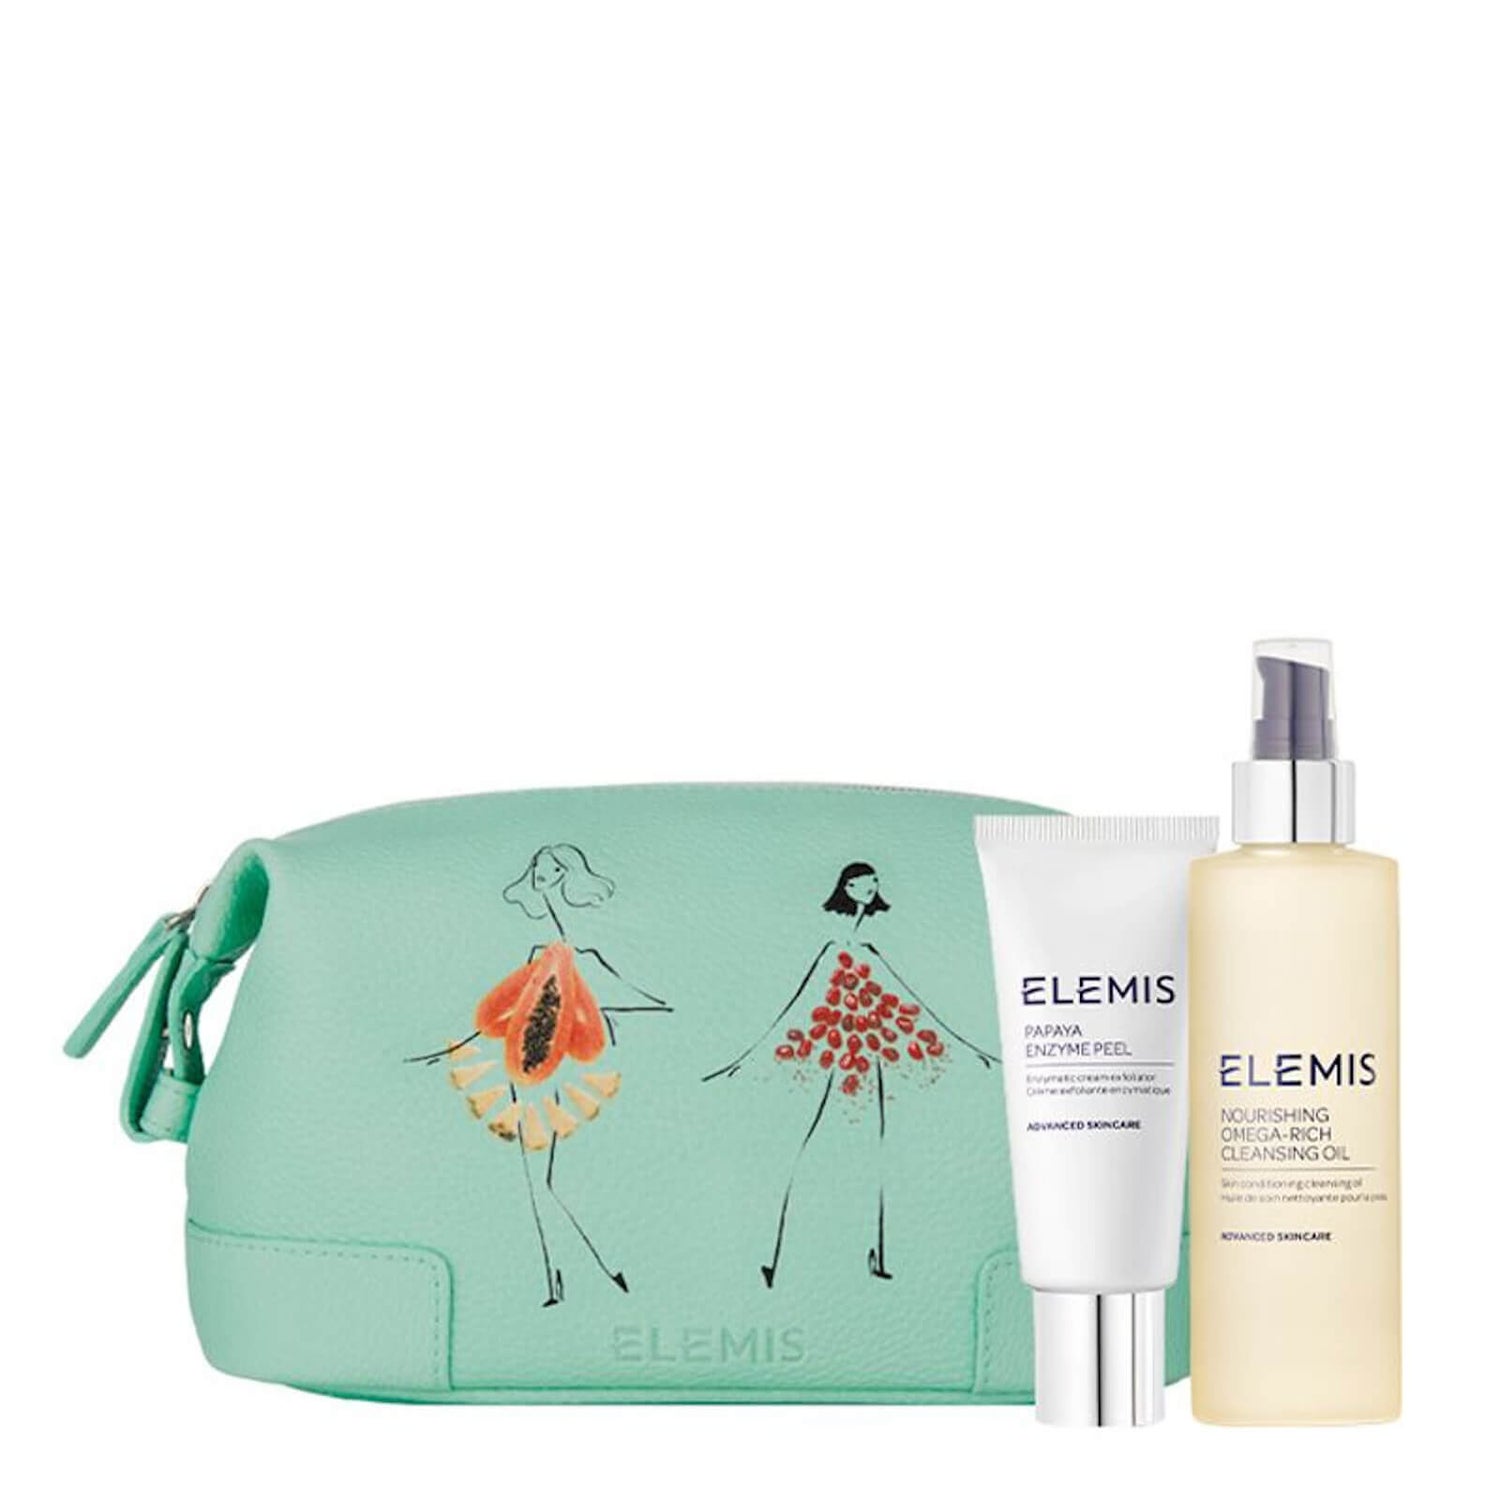 Elemis x Gretchen Roehers The Glow-Getters Limited Edition Duo Collection 全效潔膚及面膜套裝